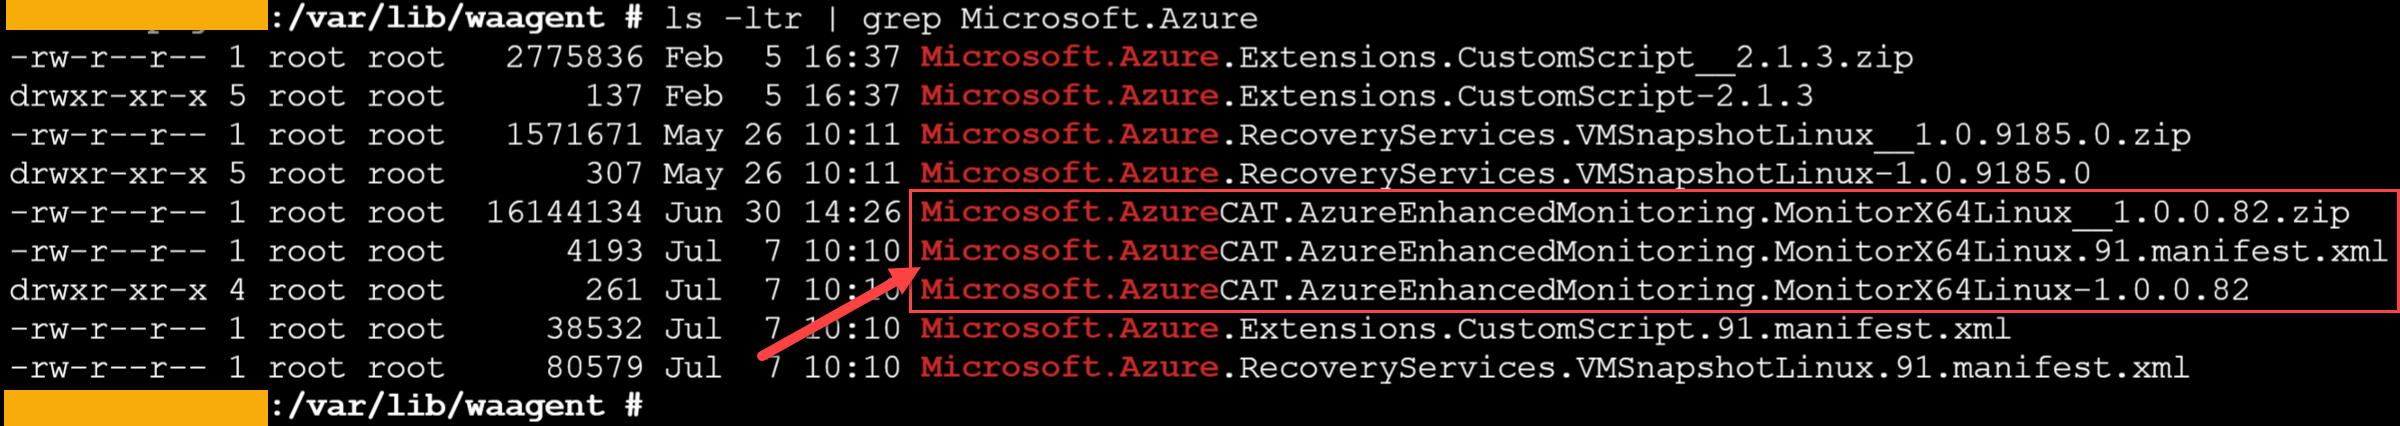 Azure Enahnced Monitoring Files